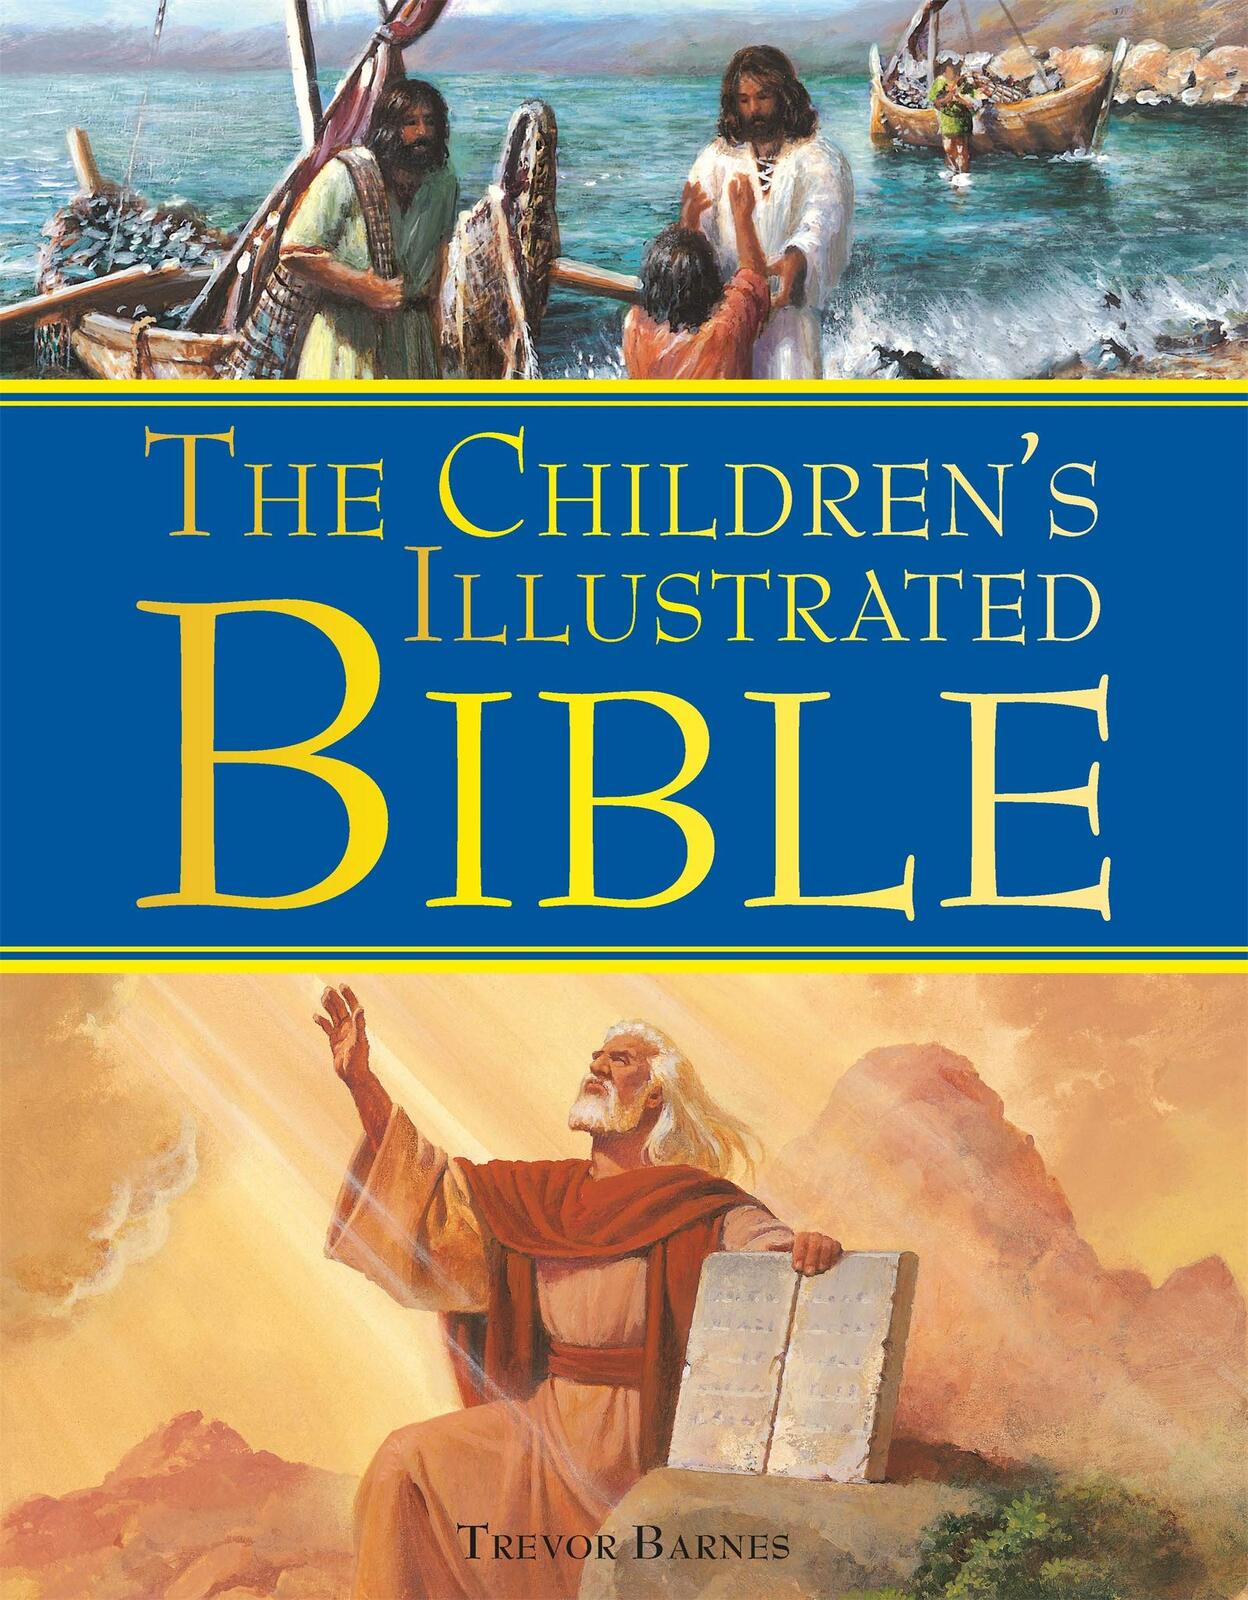 The Childrens Illustrated Bible